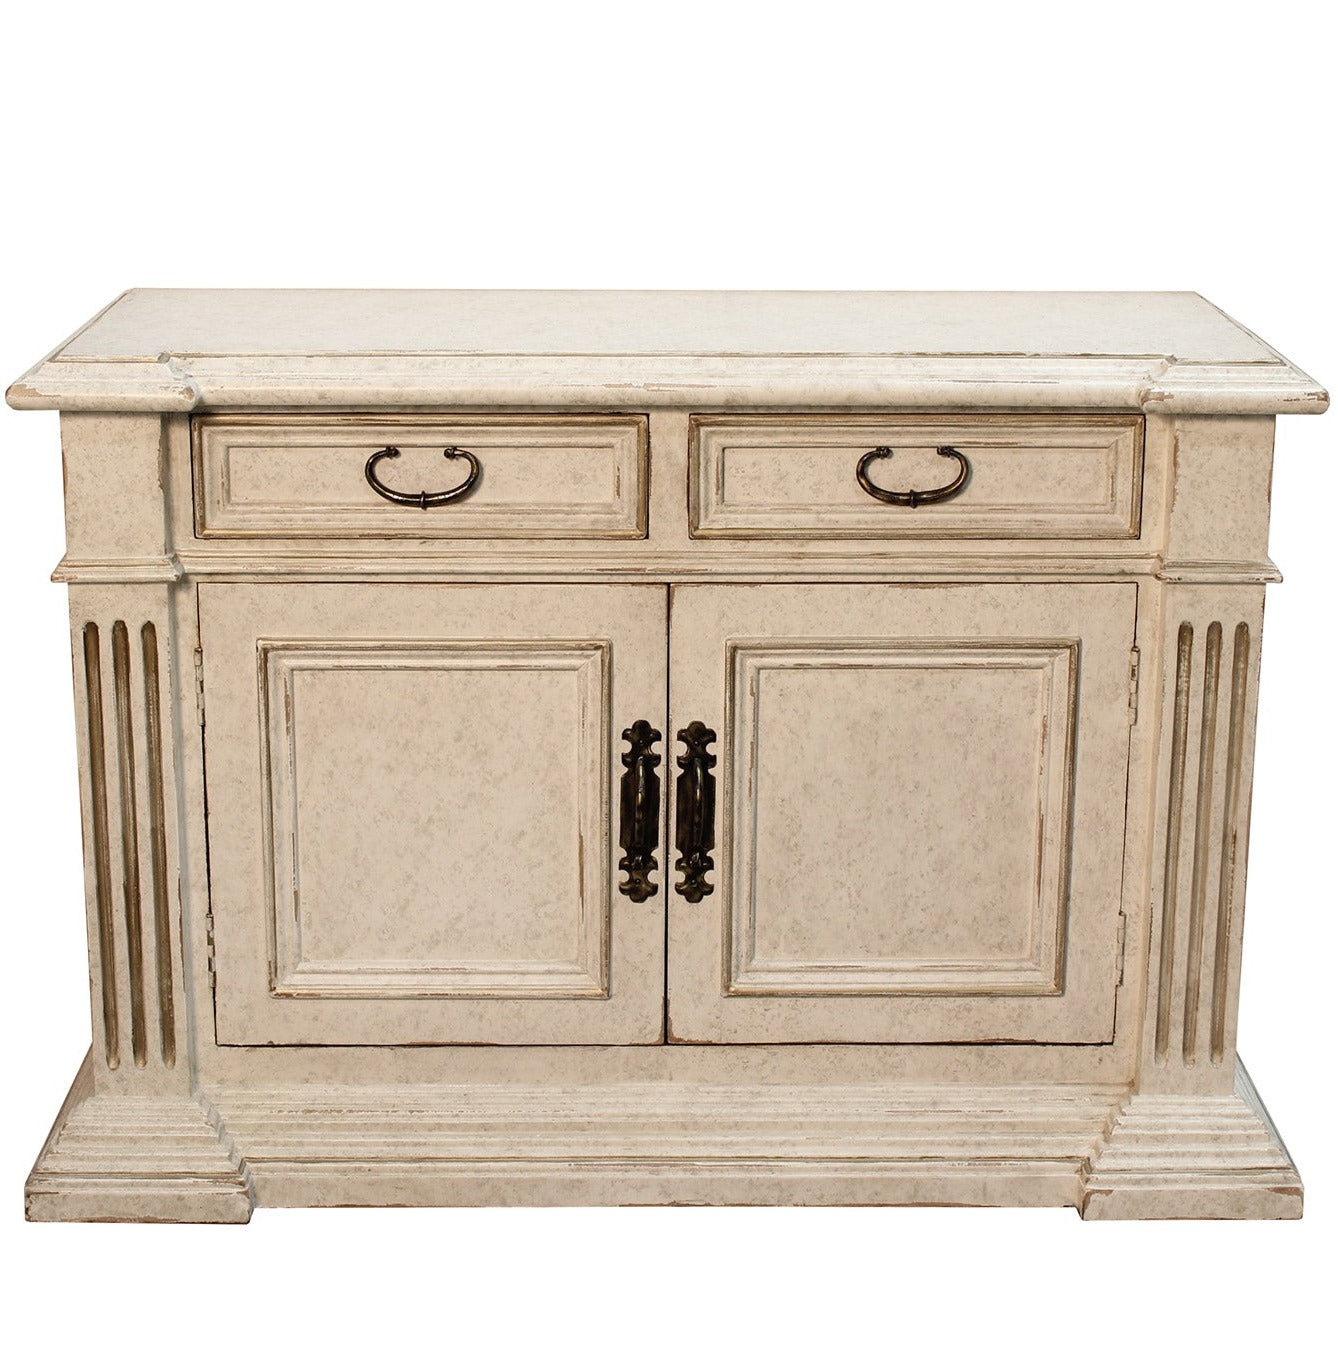 Gold Trim Cream French Country Buffet